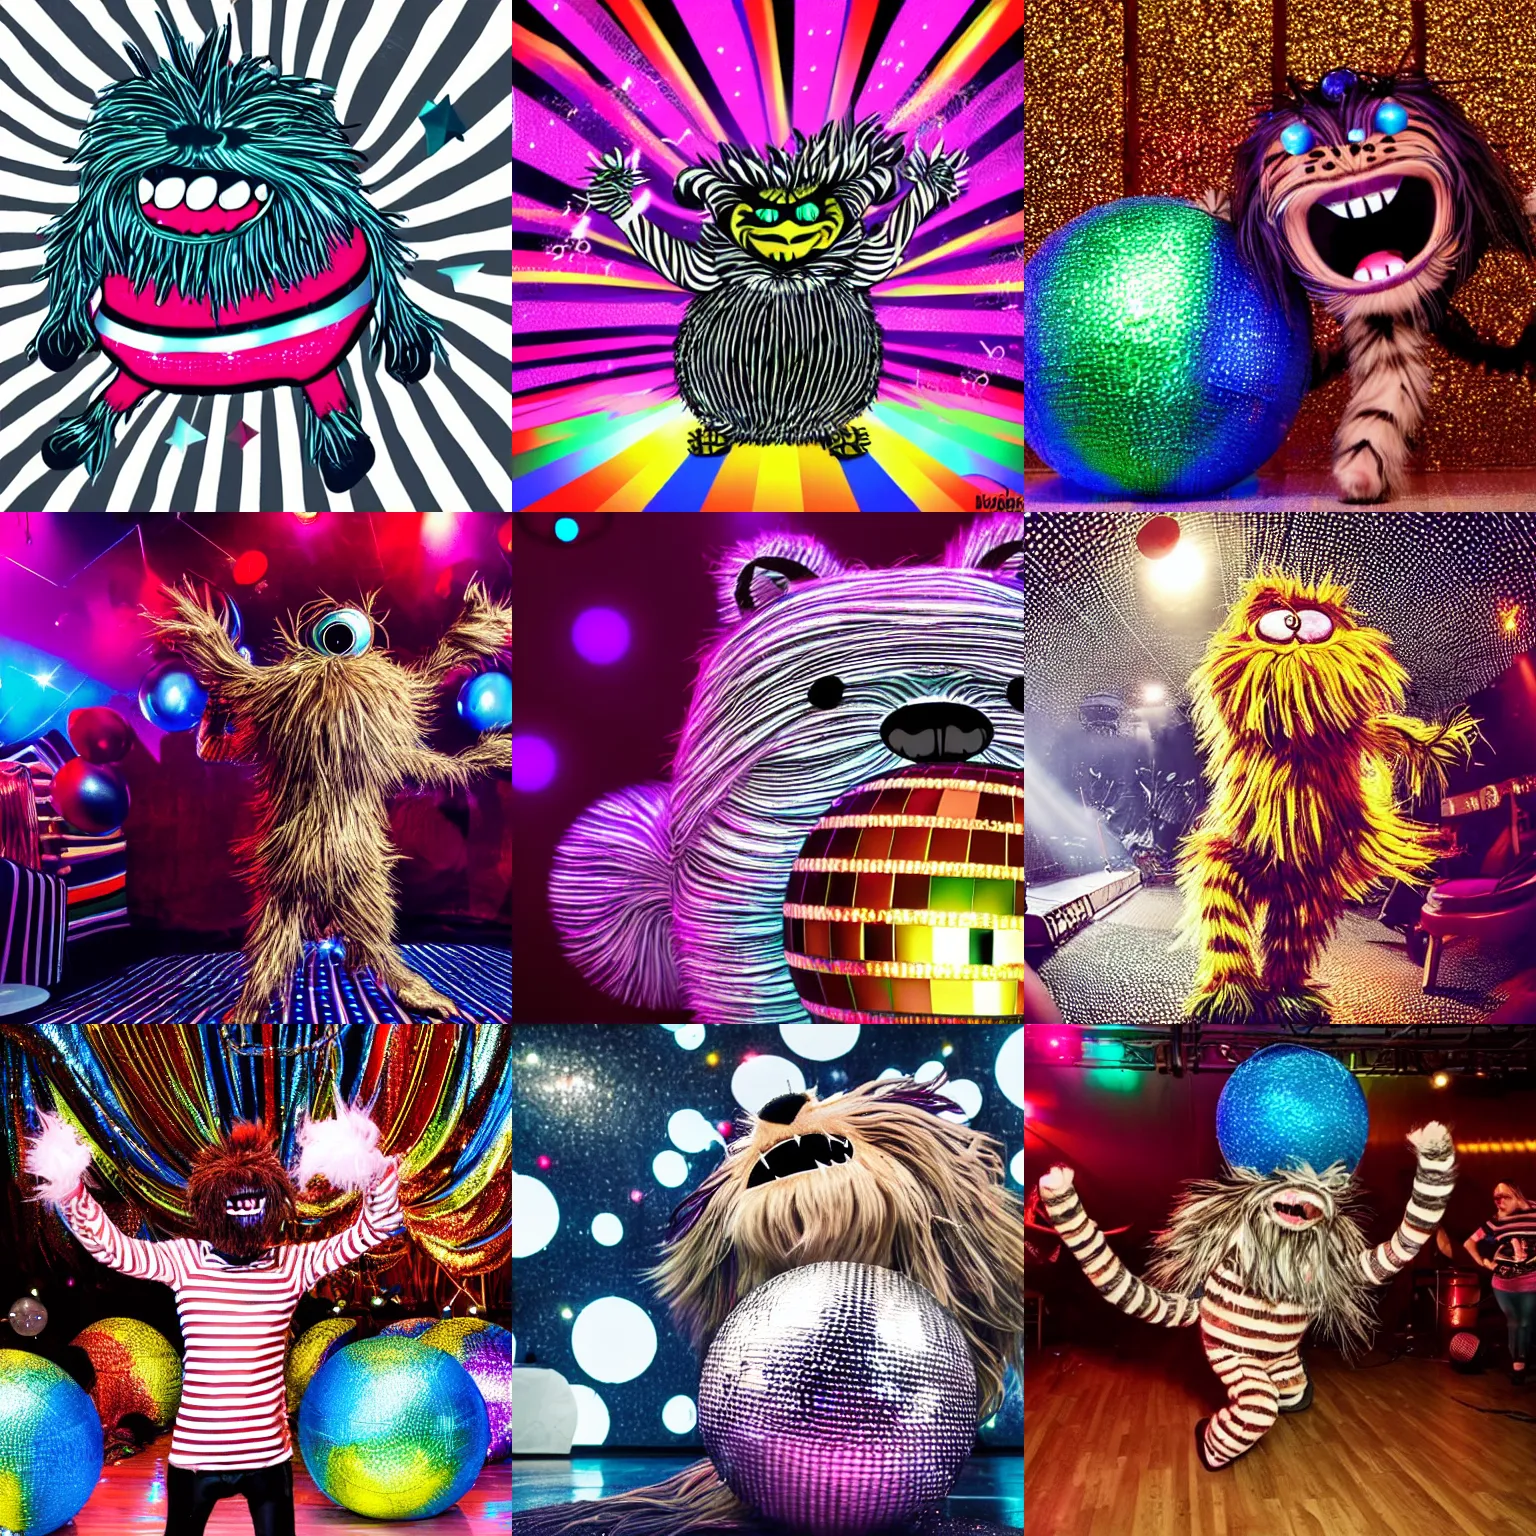 Prompt: a striped hairy monster shakes it's hips dancing underneath a disco ball